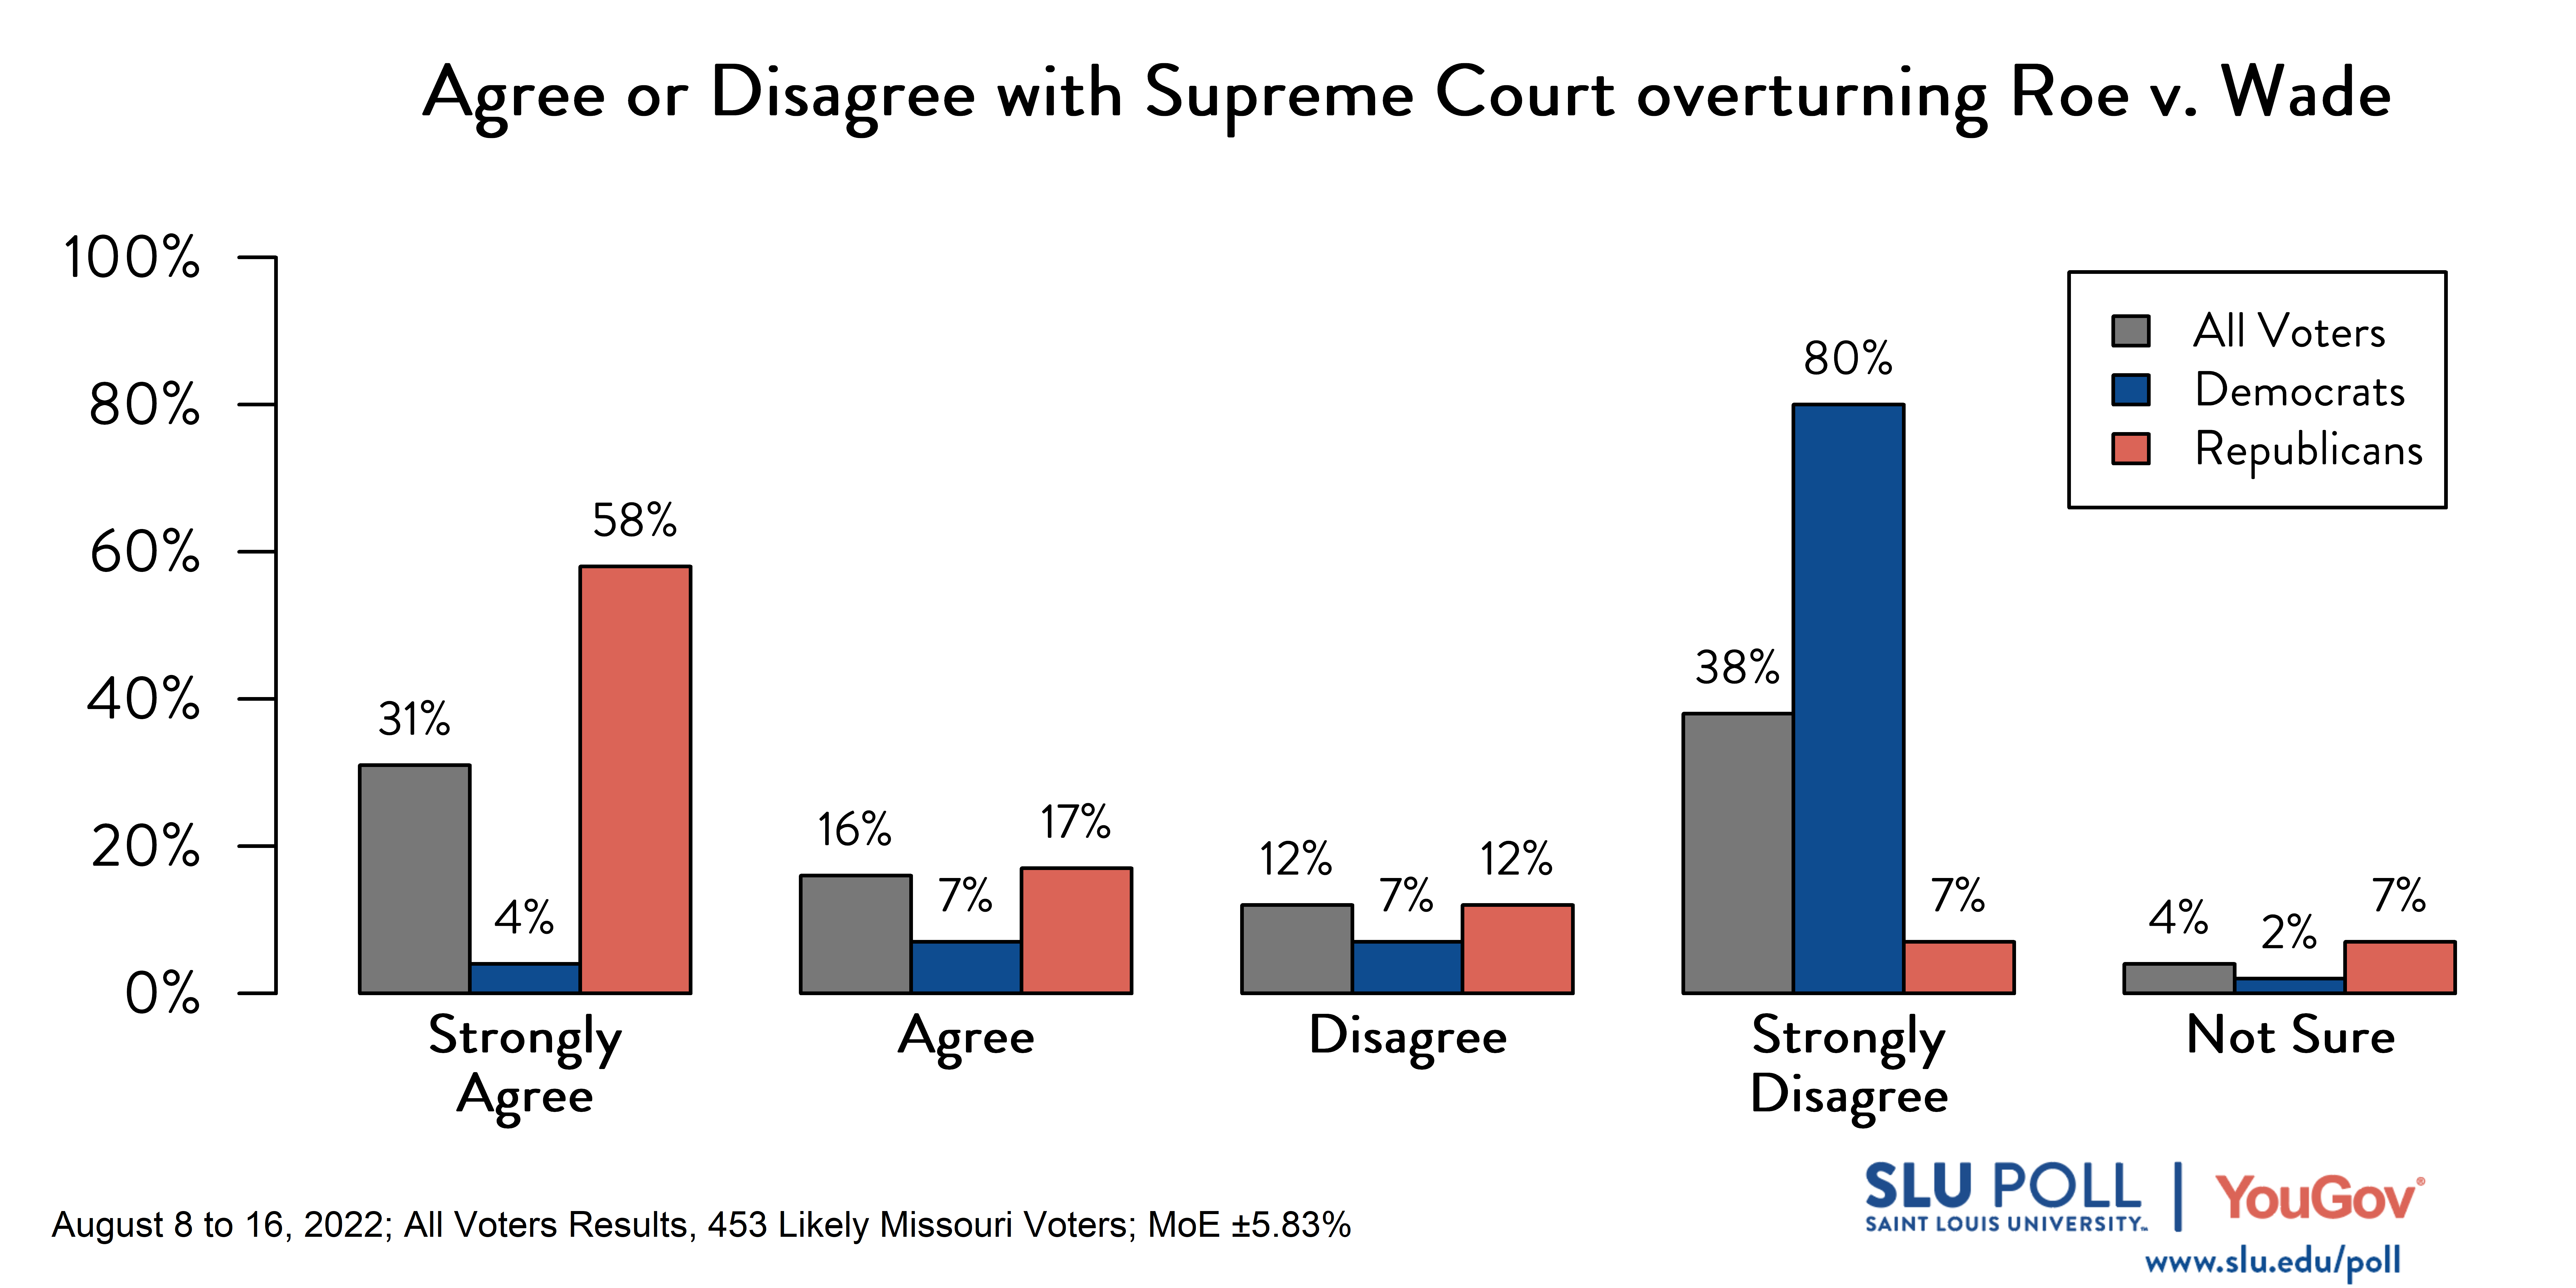 Likely voters' responses to 'In June, the United States Supreme Court overturned Roe v Wade, the landmark ruling that established the constitutional right to abortion in the United States during the first two trimesters of pregnancy. Do you agree or disagree with this Supreme Court ruling?': 31% Strongly Agree, 16% Agree, 12% Disagree, 38% Strongly Disagree, and 4% Not sure. Democratic voters' responses: ' 4% Strongly Agree, 7% Agree, 7% Disagree, 80% Strongly Disagree, and 2% Not sure. Republican voters' responses: 58% Strongly Agree, 17% Agree, 12% Disagree, 7% Strongly Disagree, and 7% Not sure.